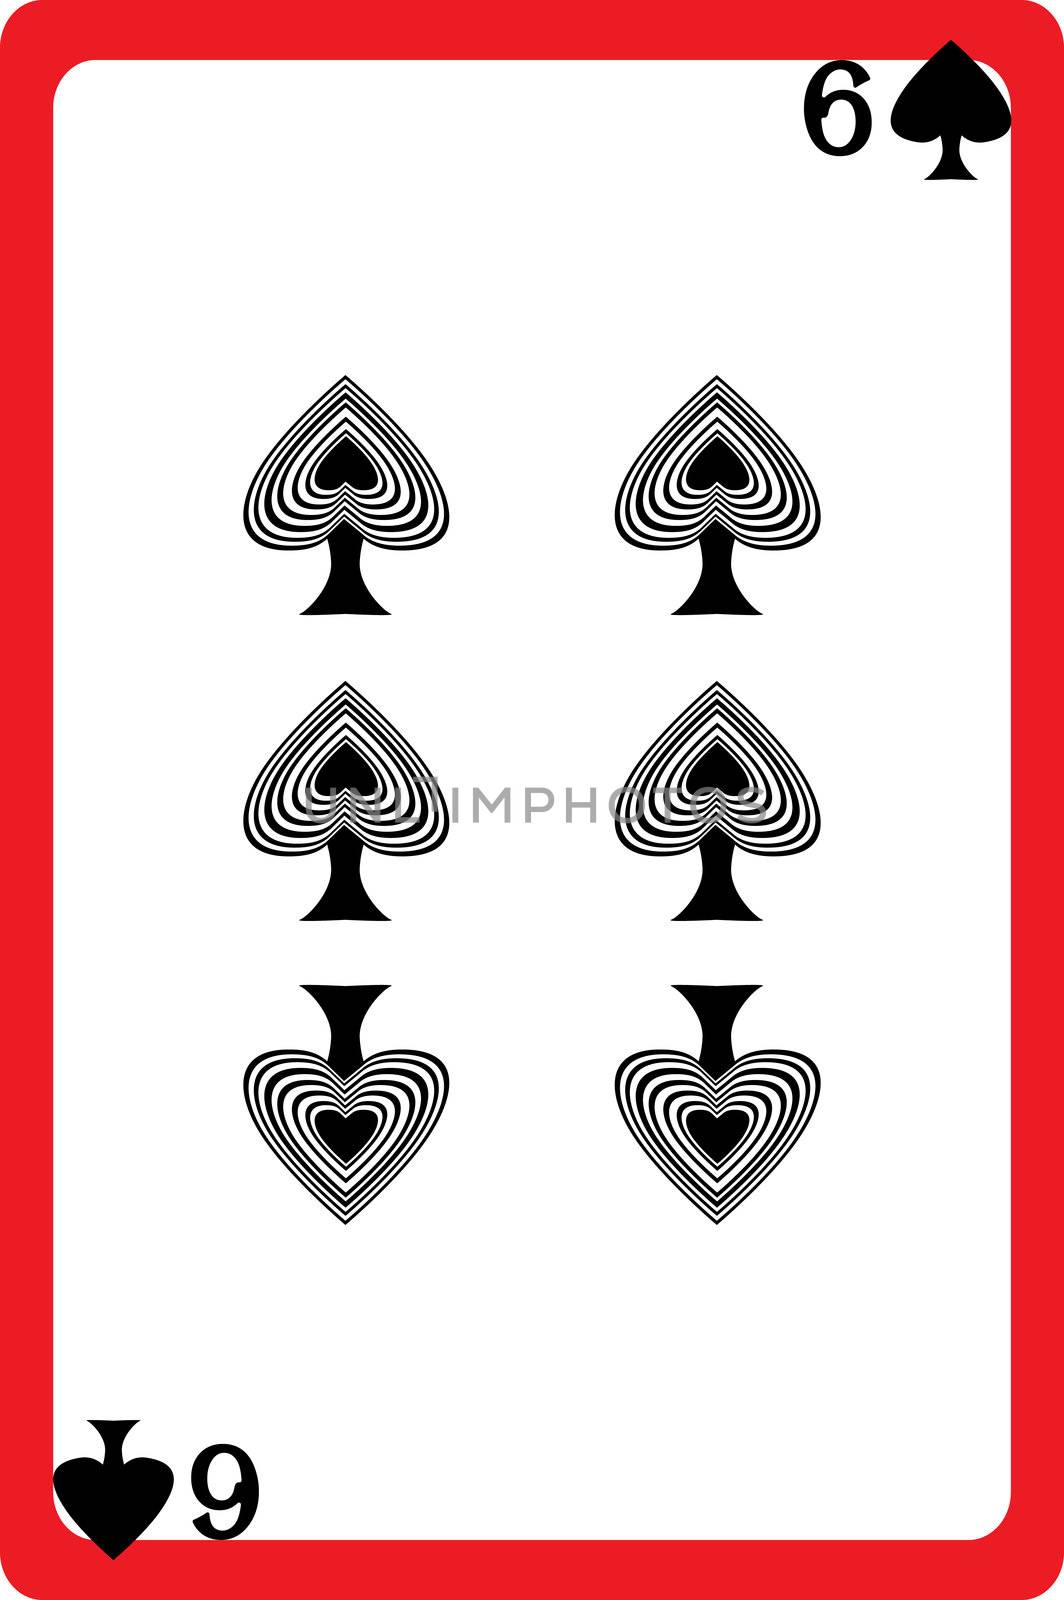 Scale hand drawn illustration of a playing card representing the six of spades, one element of a deck